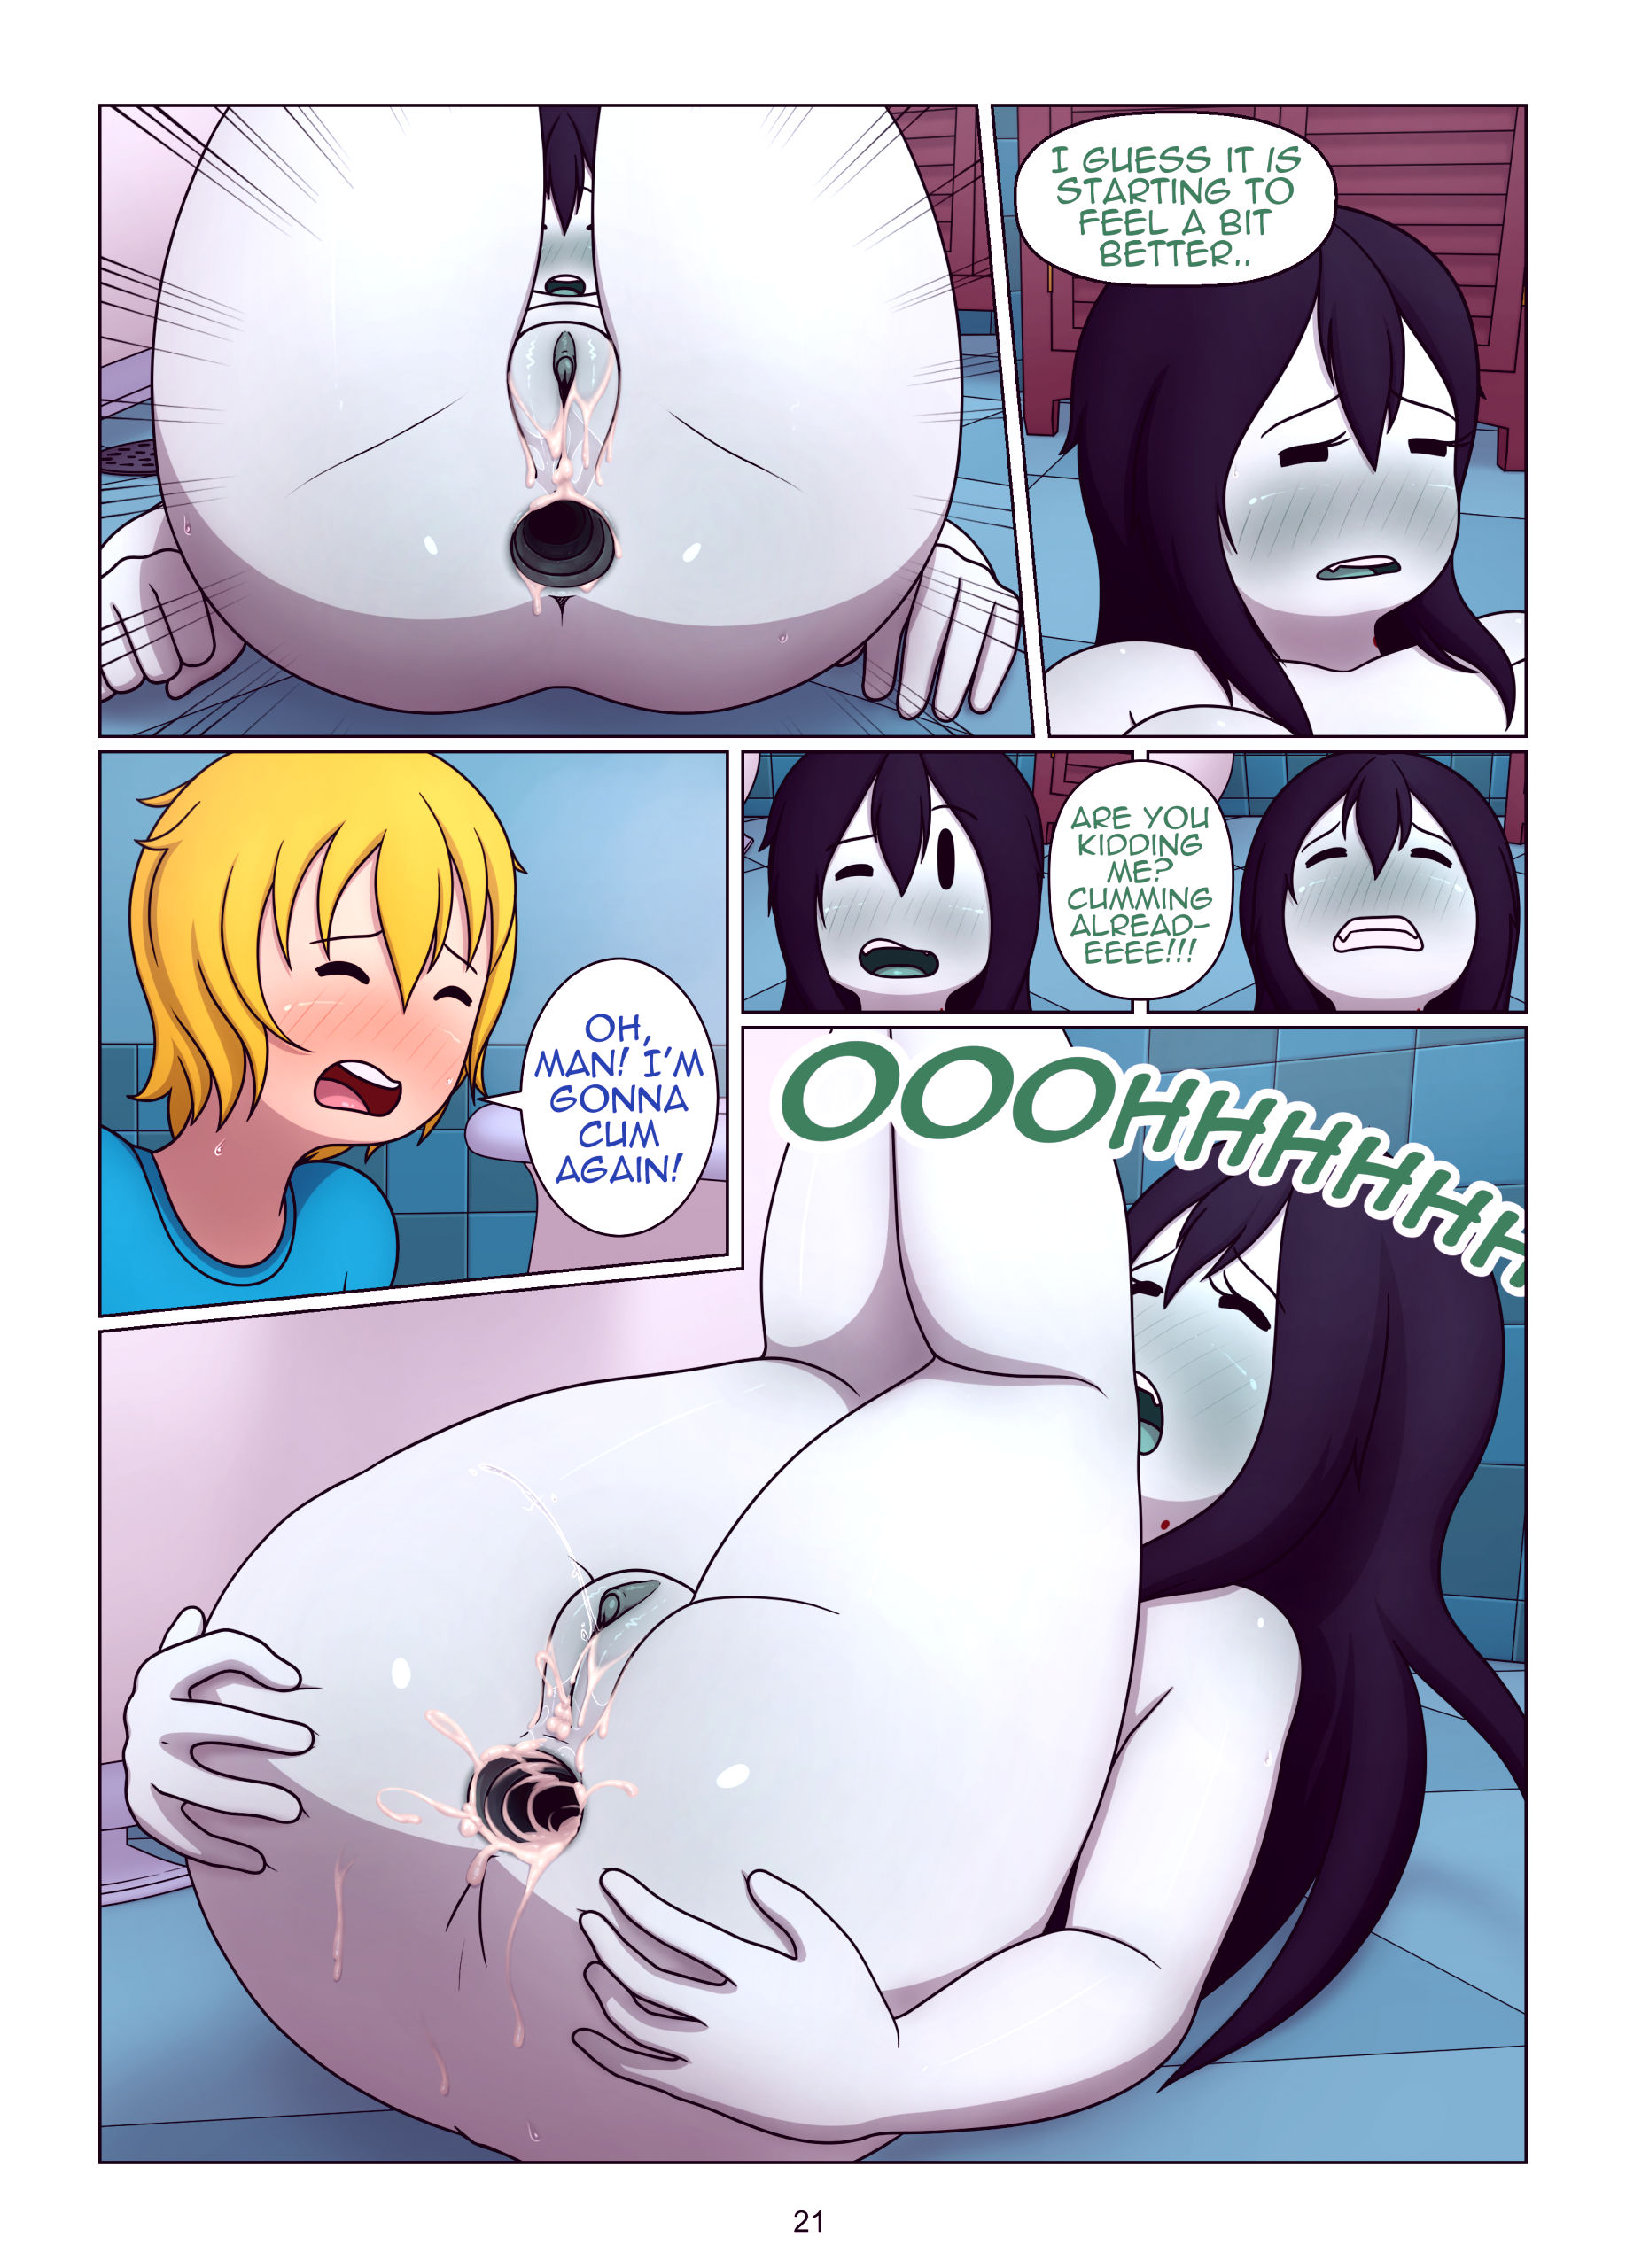 Misadventure time the collection porn comic picture 22.